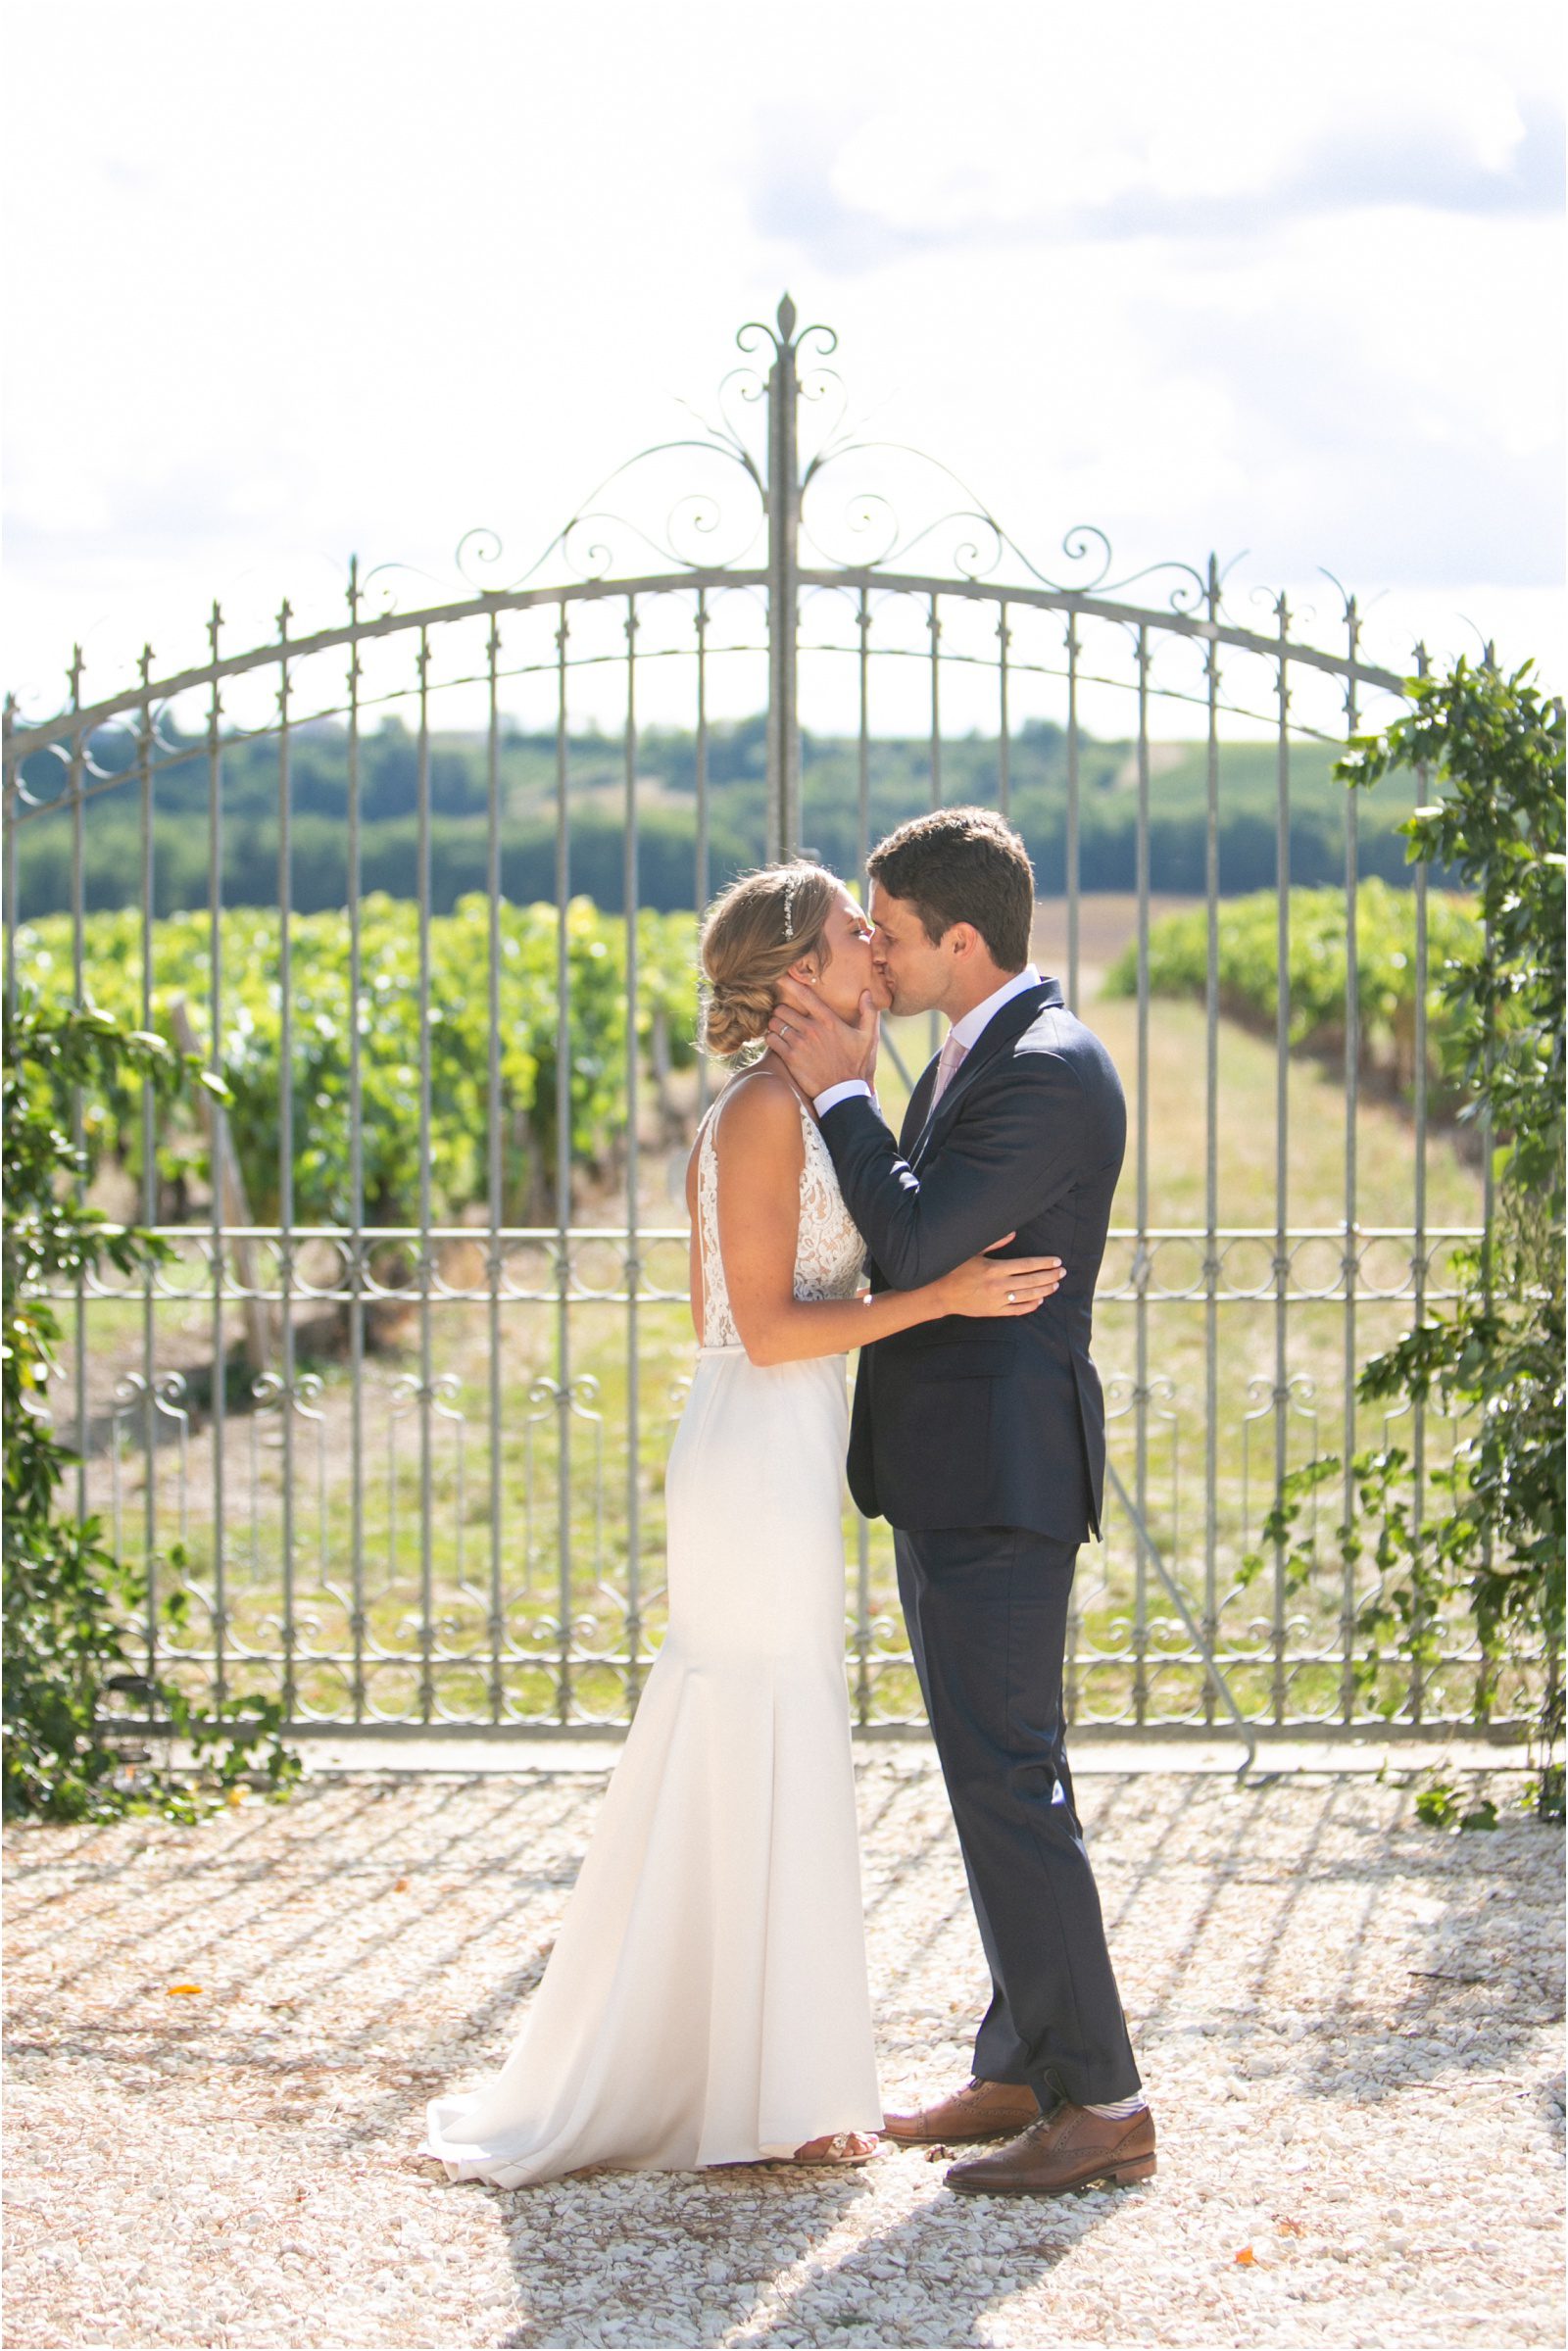 South of France outdoor wedding